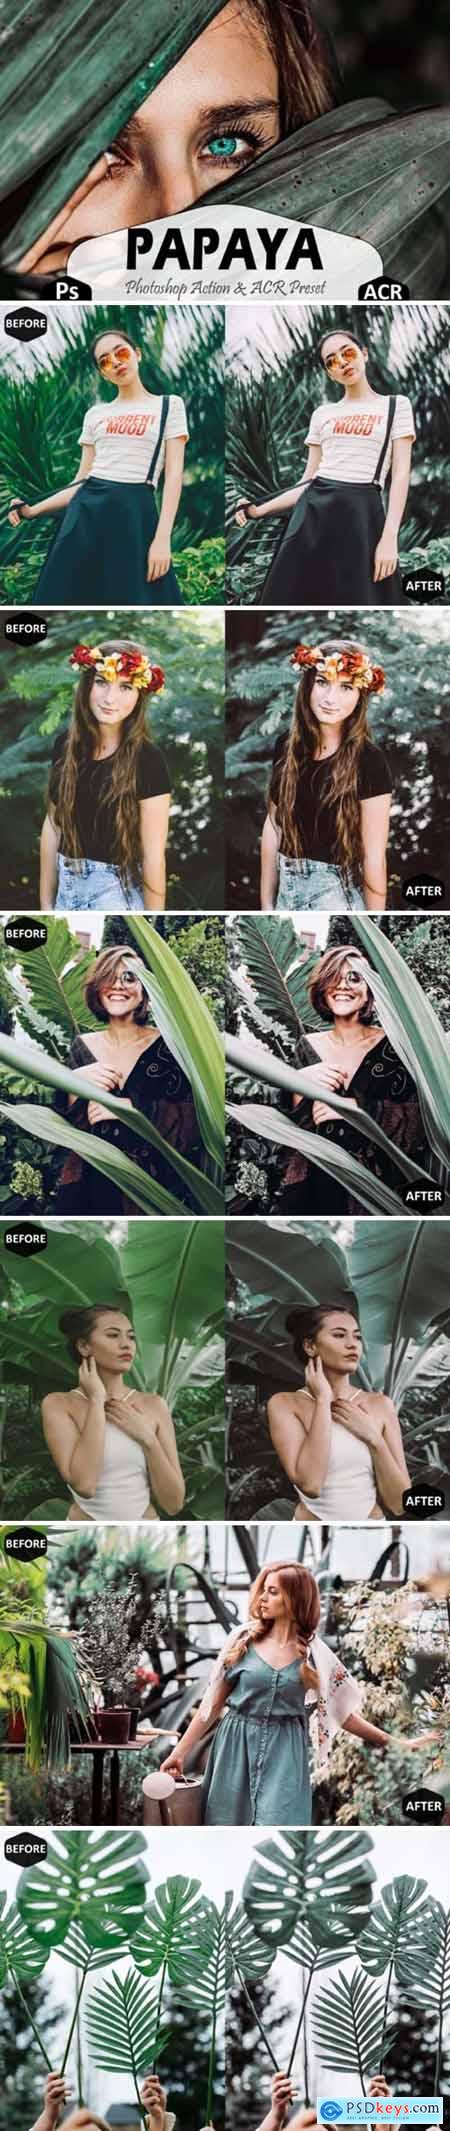 Papaya Photoshop Actions and ACR Presets 1668550